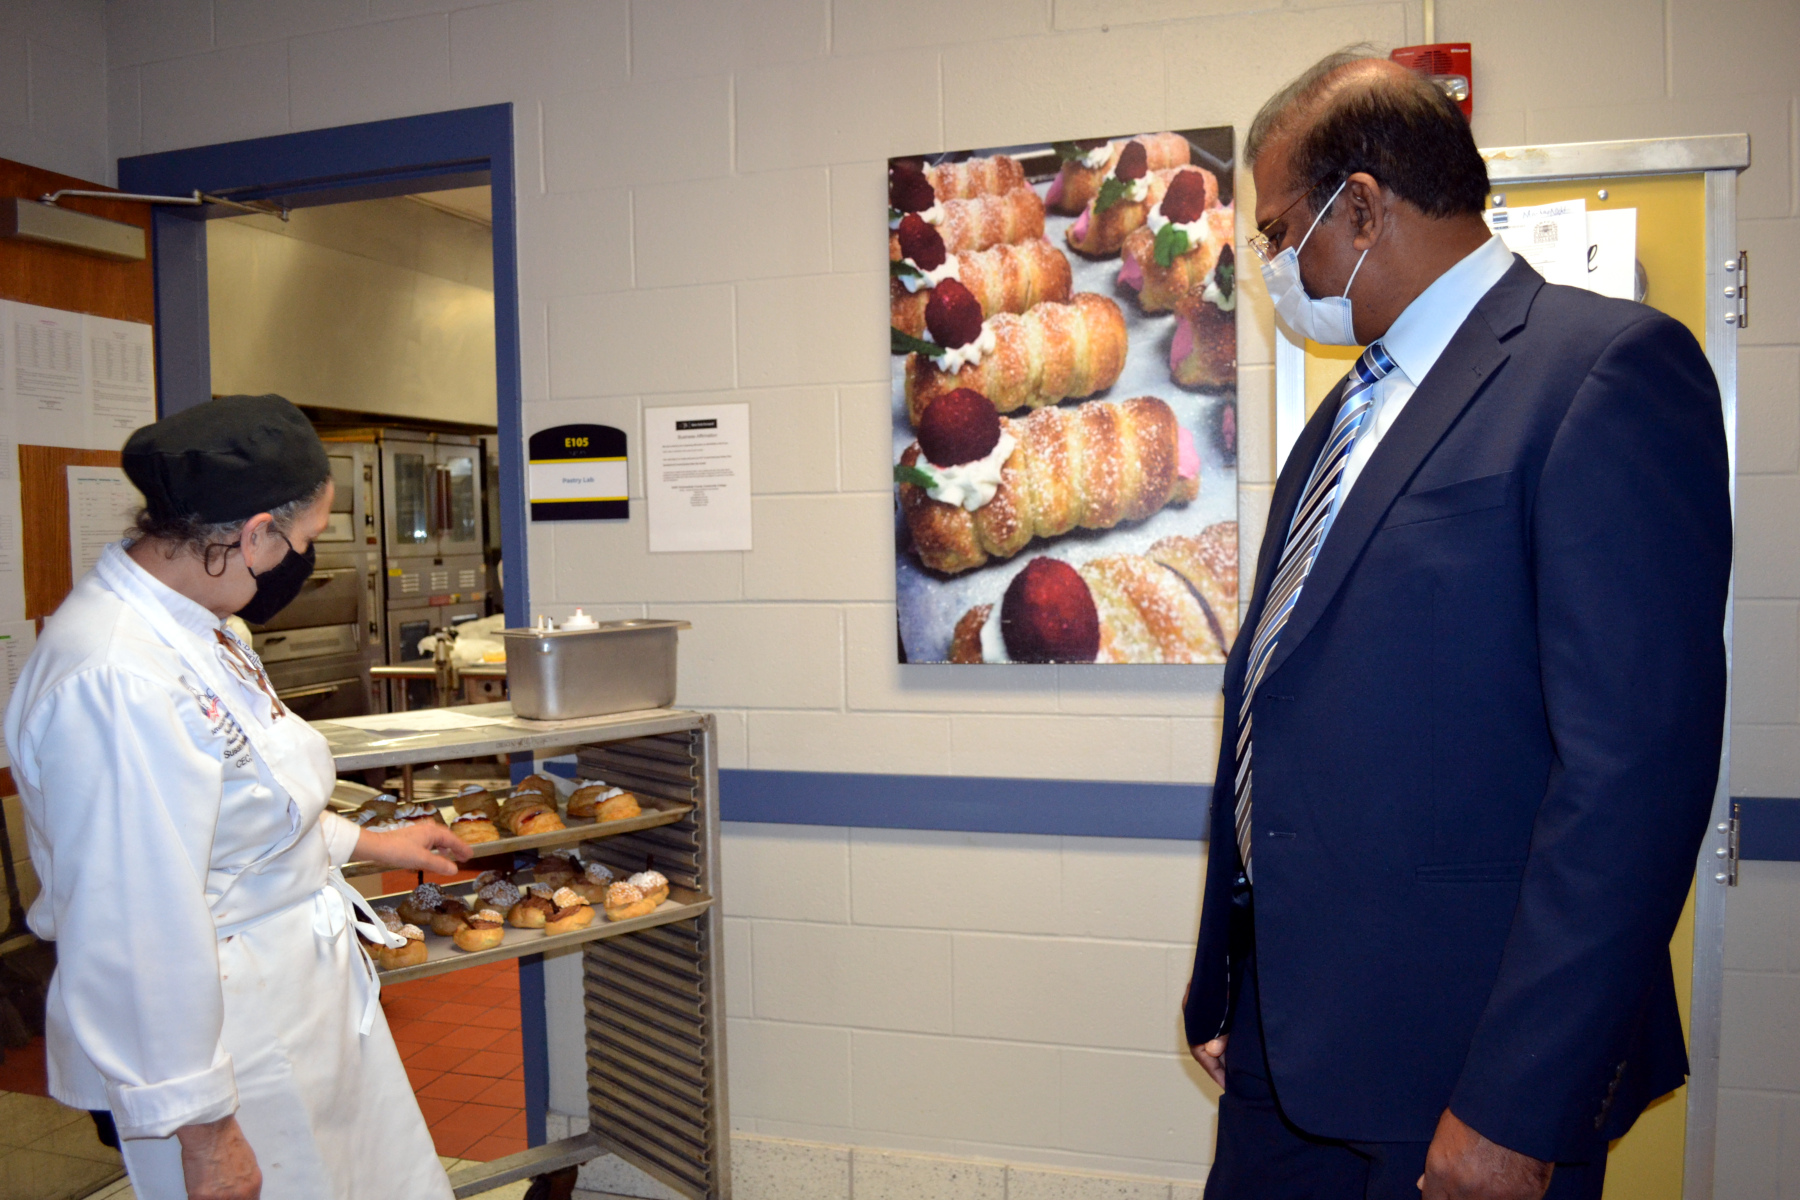 Chef Susan Hatalsky, Baking Professor, showing Dr. Dhinakaran baked items here students have created.